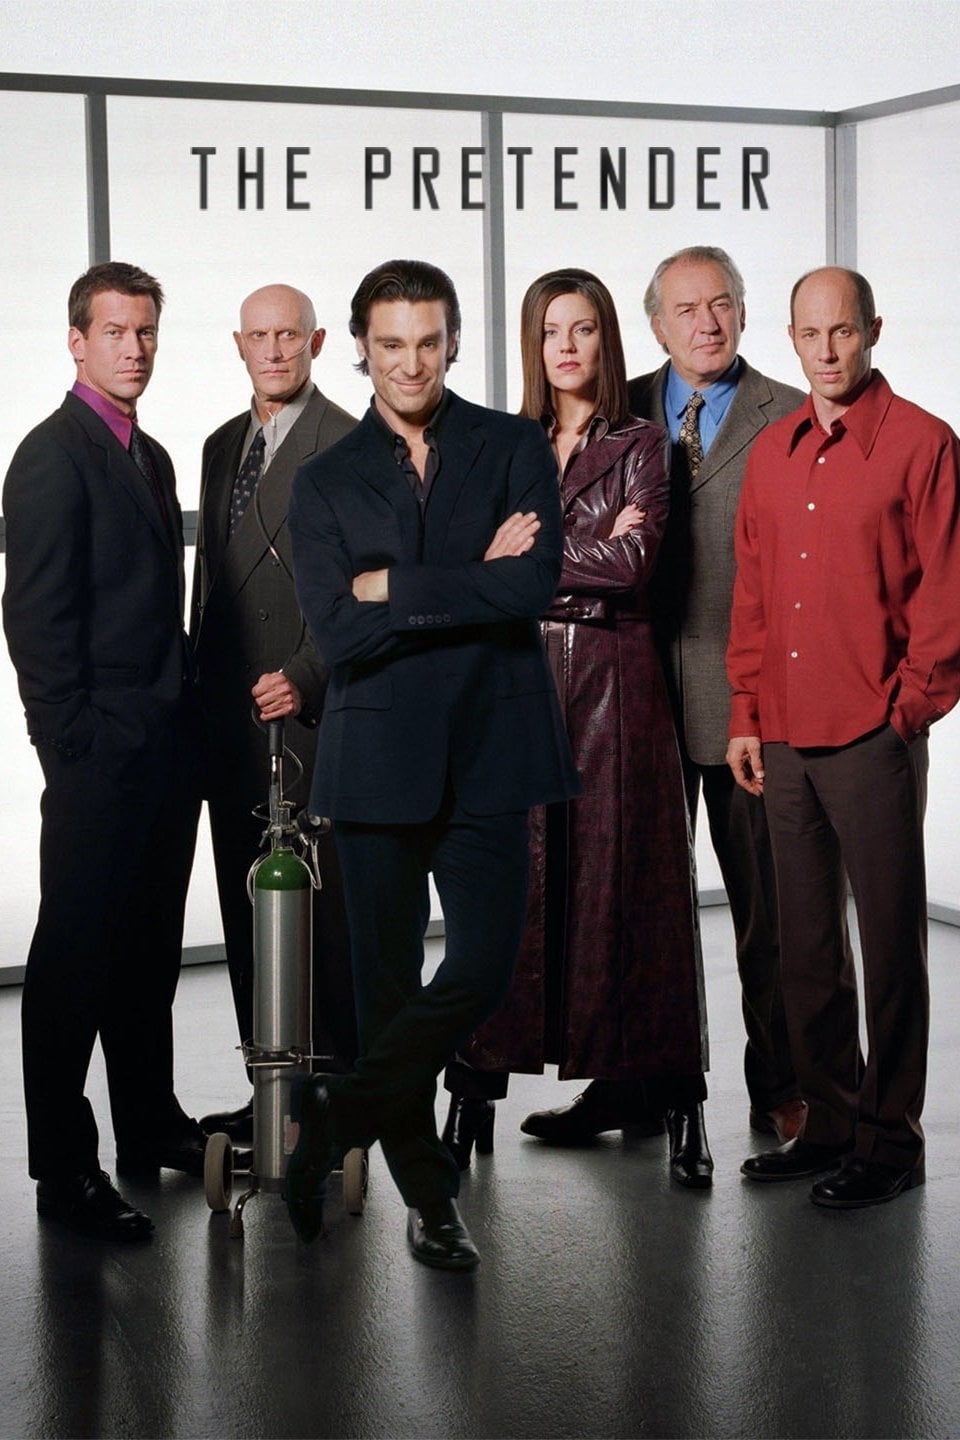 The Pretender TV Shows About Manhunt